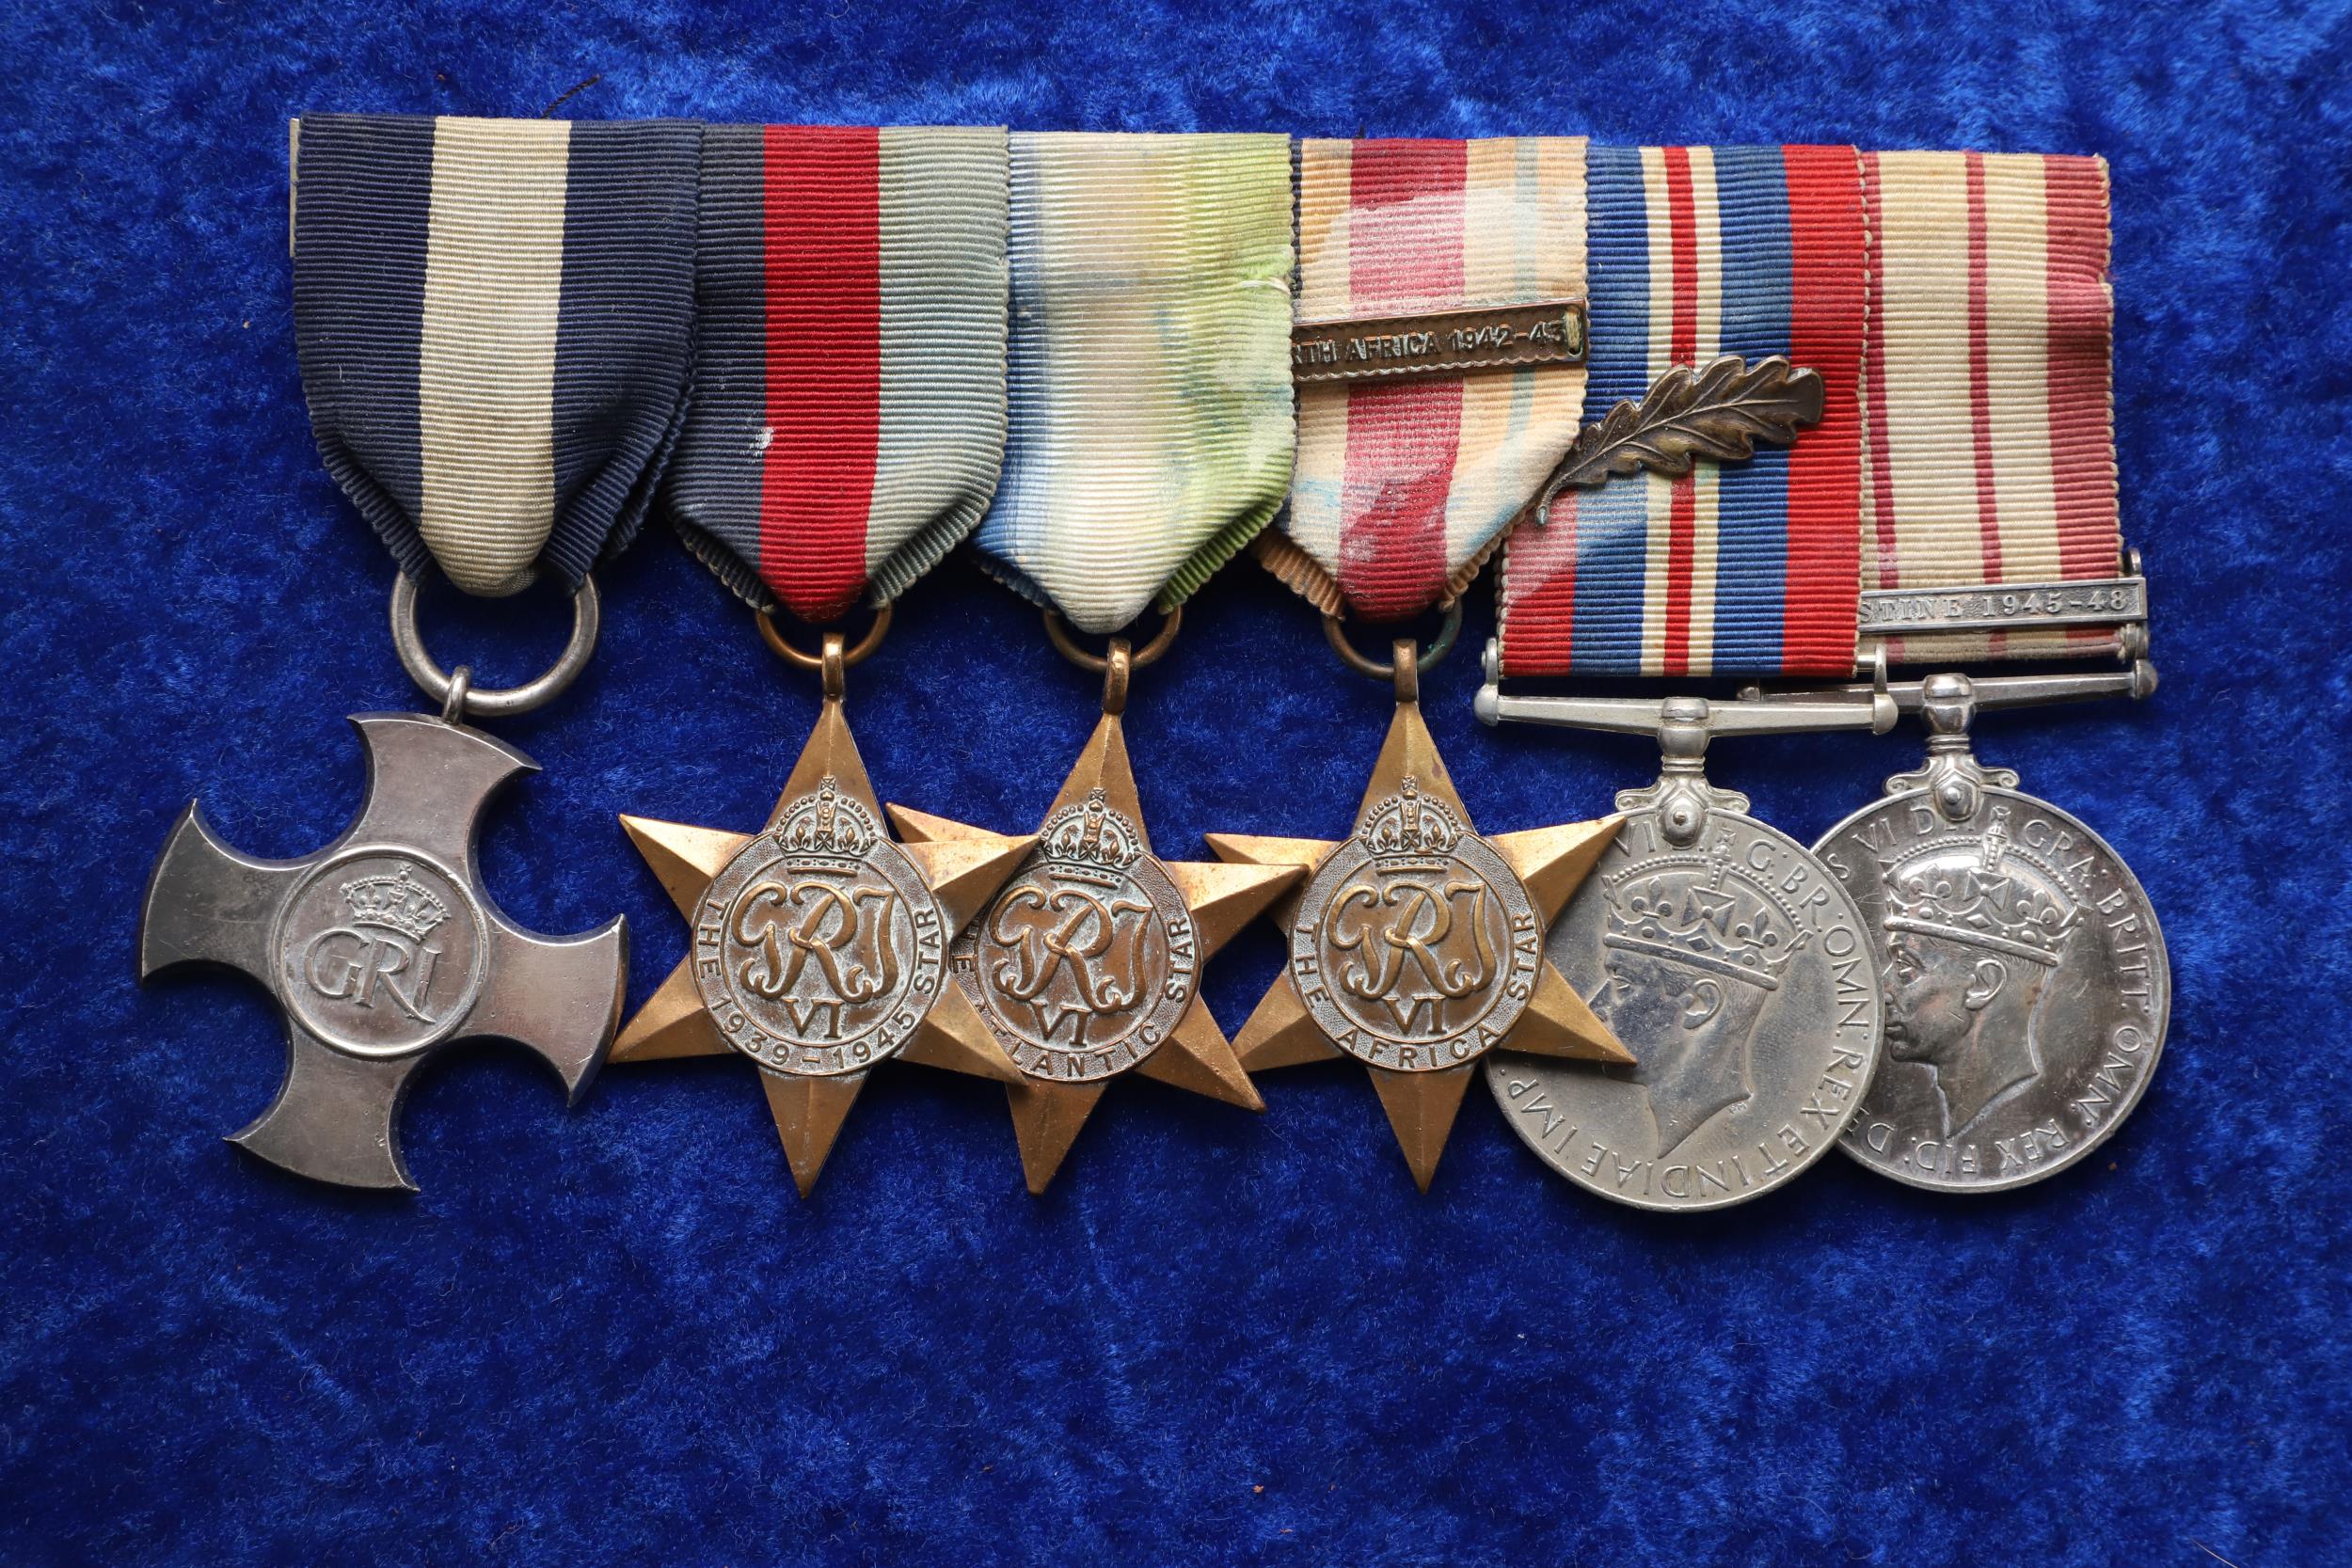 AN HISTORIC 'DUNKIRK' DISTINGUISHED SERVICE CROSS GROUP OF SIX TO LT CDR COX OF THE ROYAL NAVY.